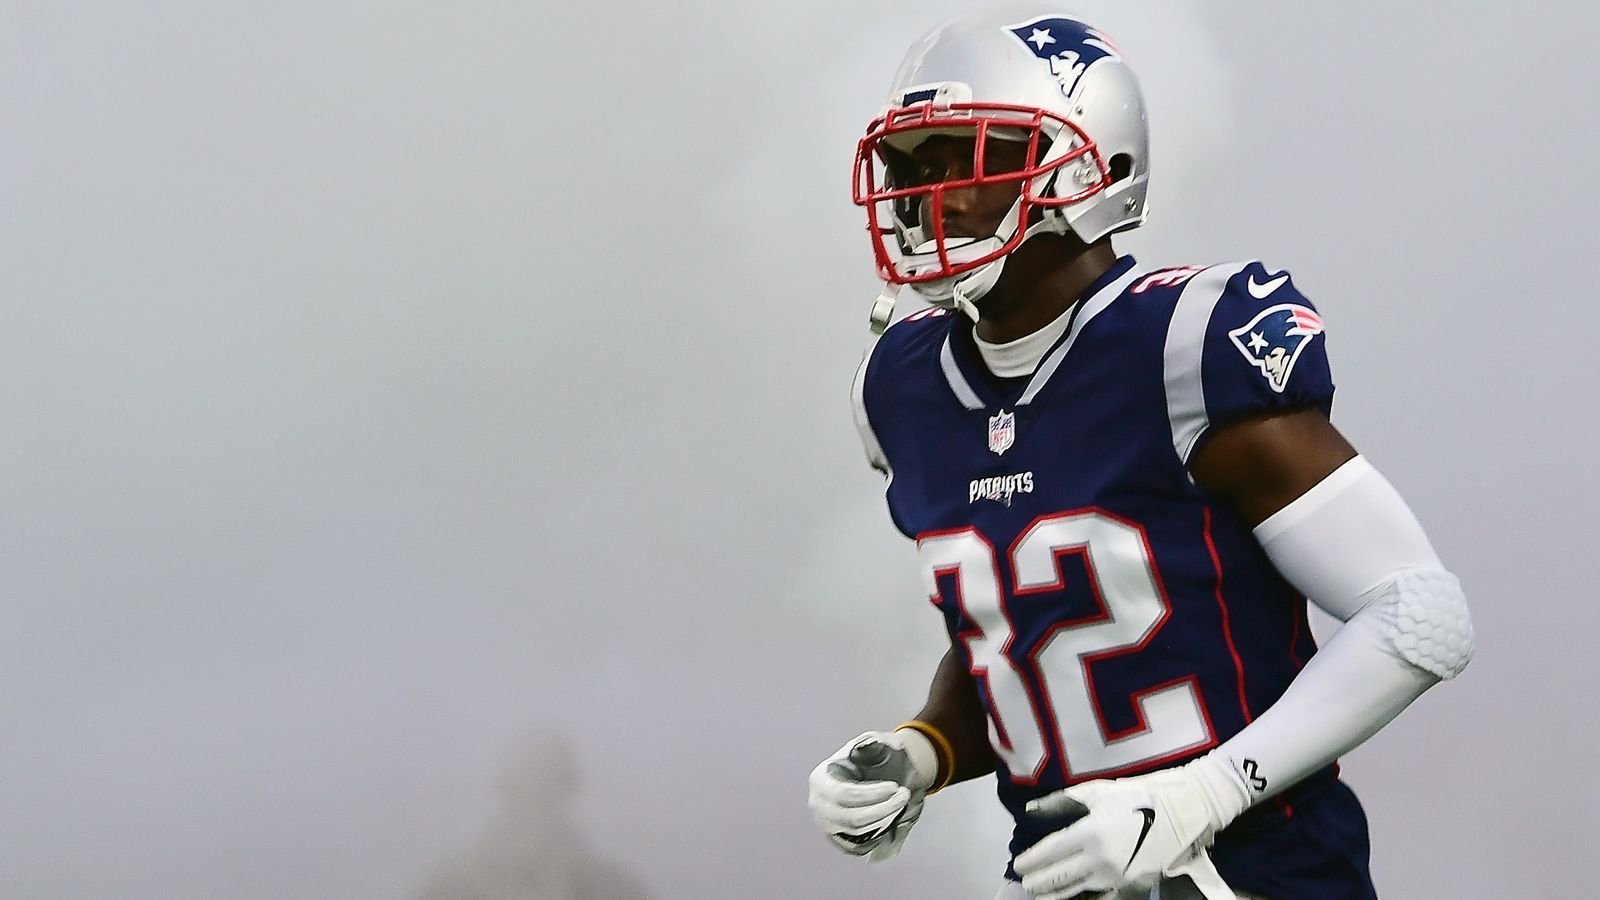 
                <strong>New England Patriots: Devin McCourty</strong><br>
                Position: Safety
              